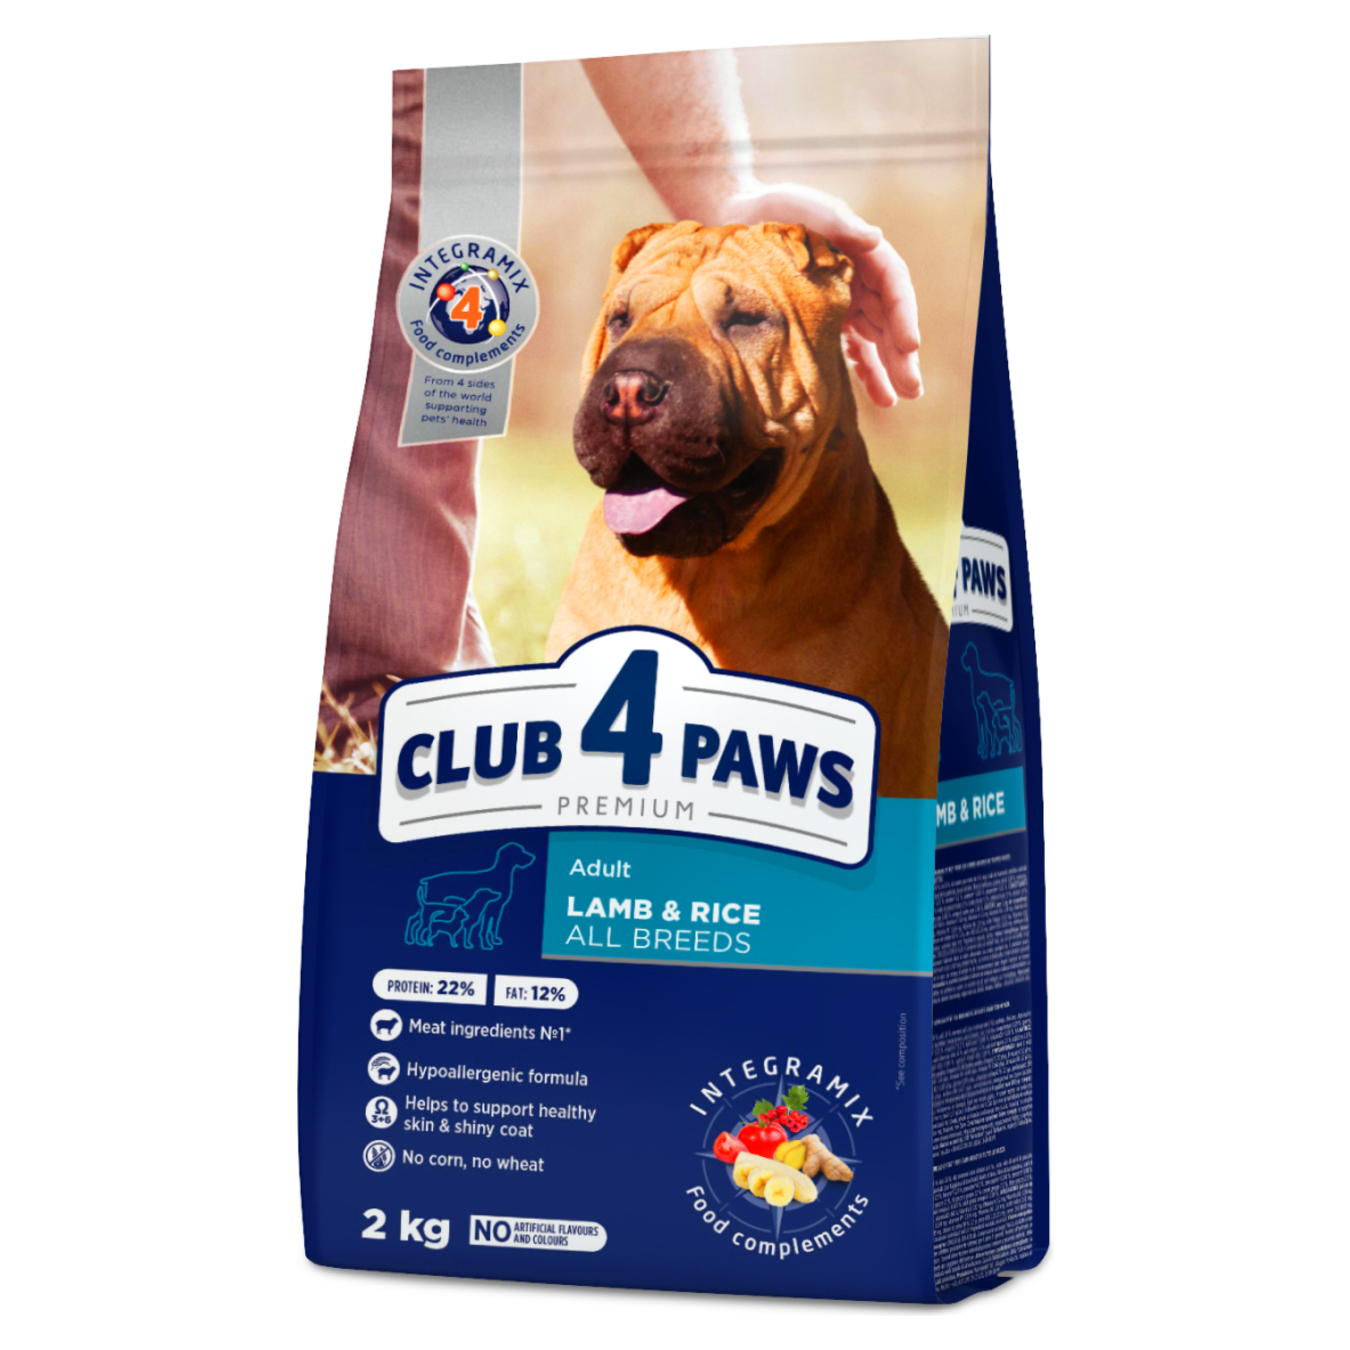 Club 4 paws Premium Dry food lamb and rice for adult dogs 2 kg